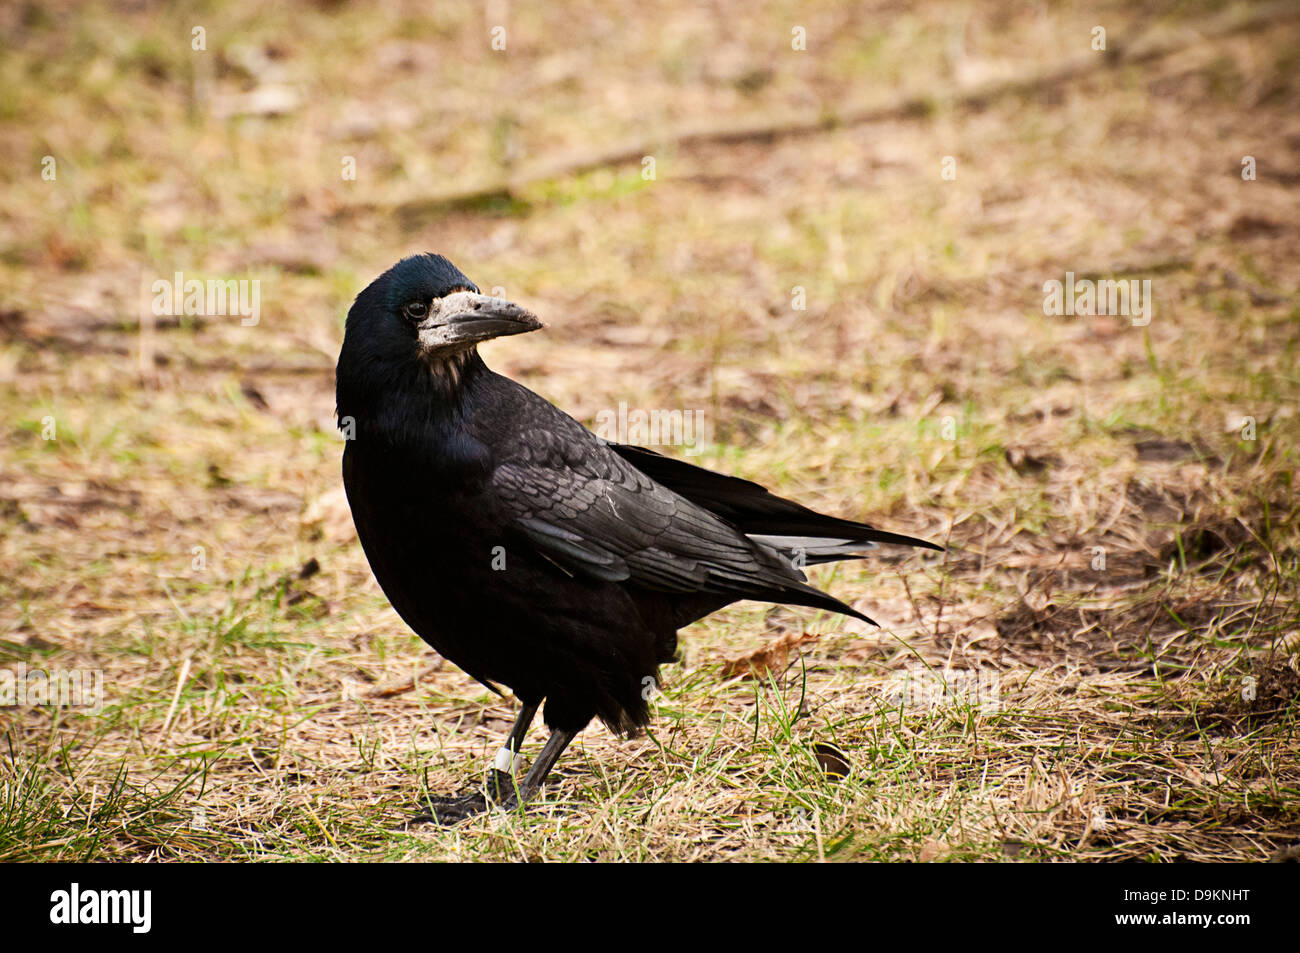 Crow standing in grass Banque D'Images